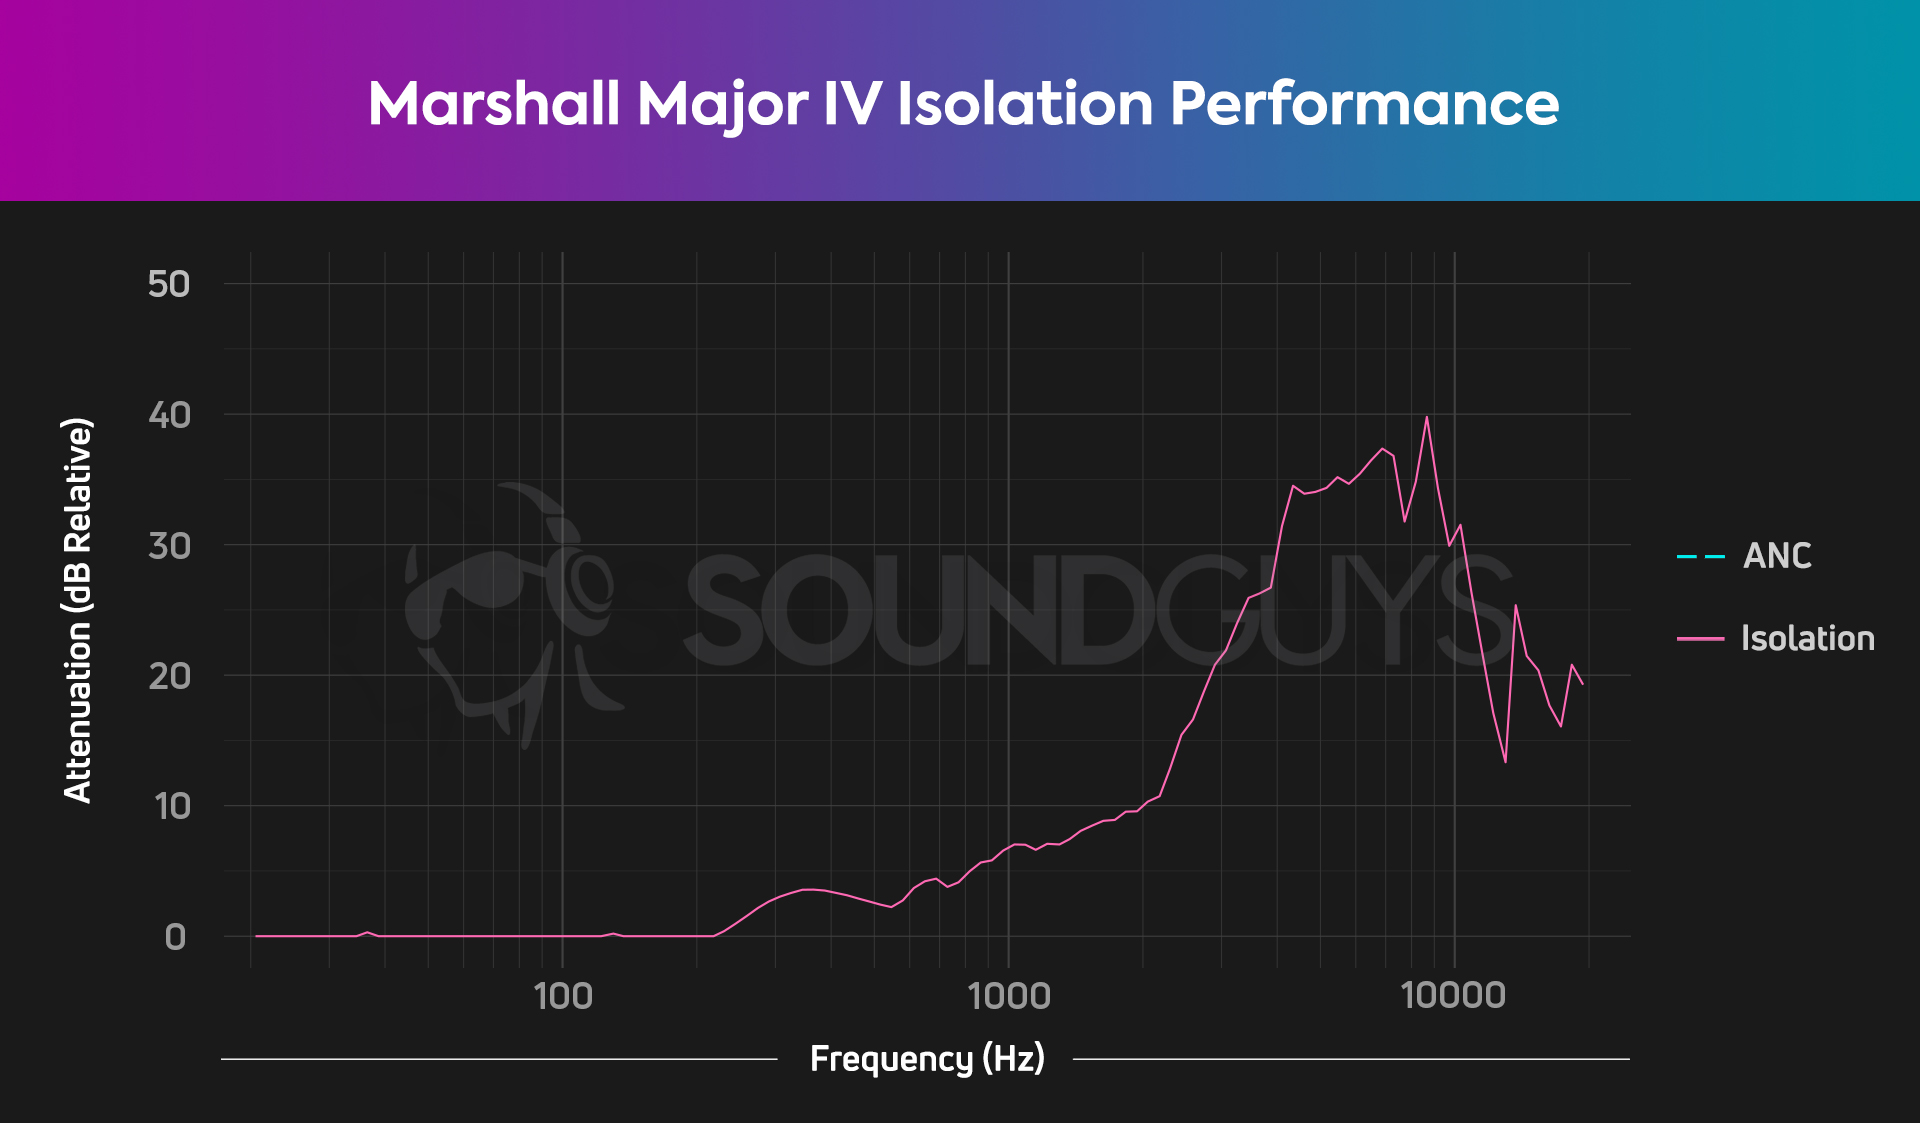 A chart shows the isolation performance of the Marshall Major IV which is okay for on-ear headphones.